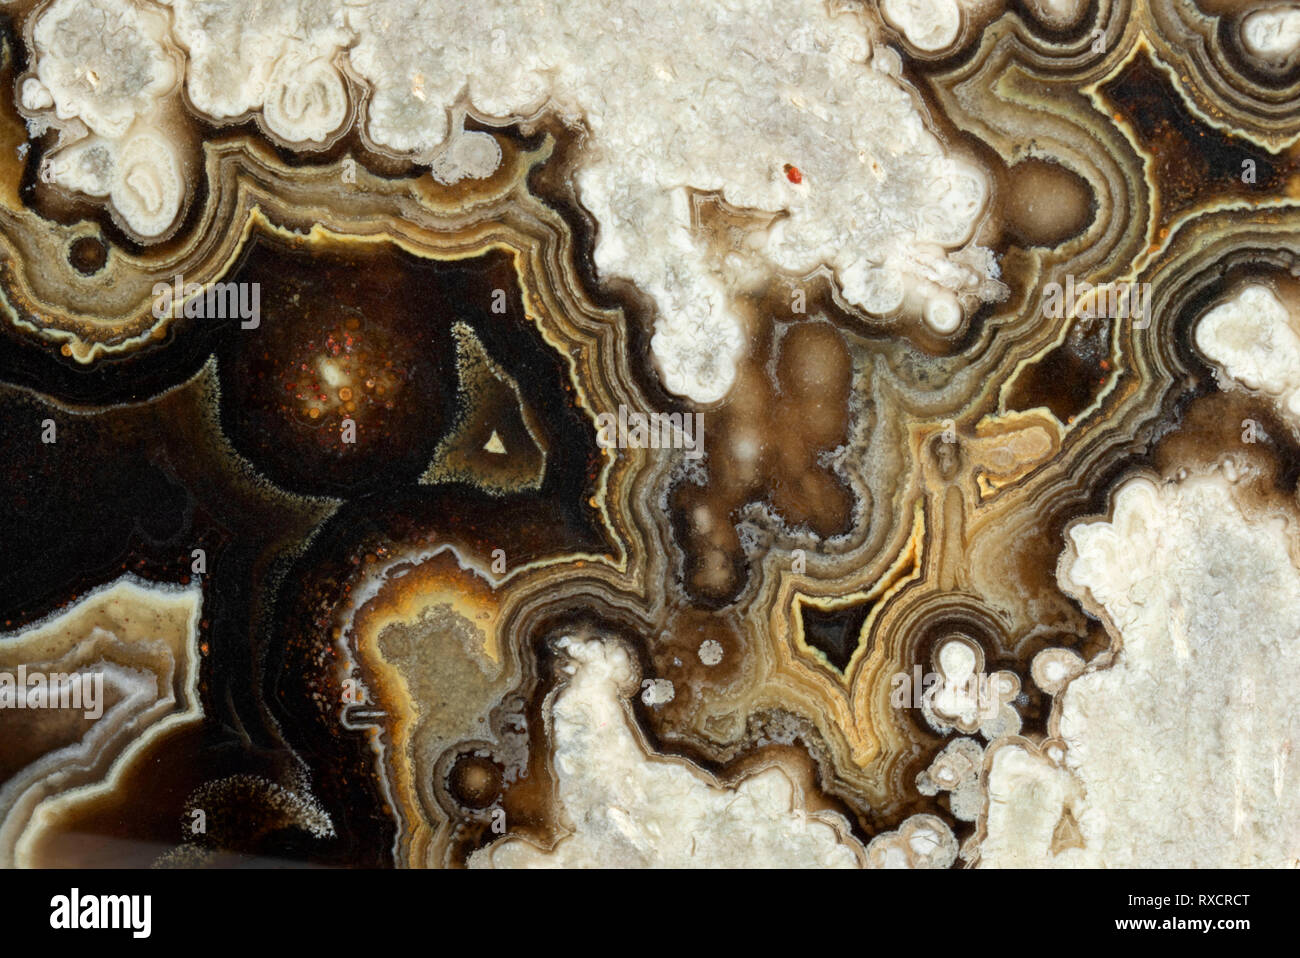 Mexican lace agate Stock Photo - Alamy